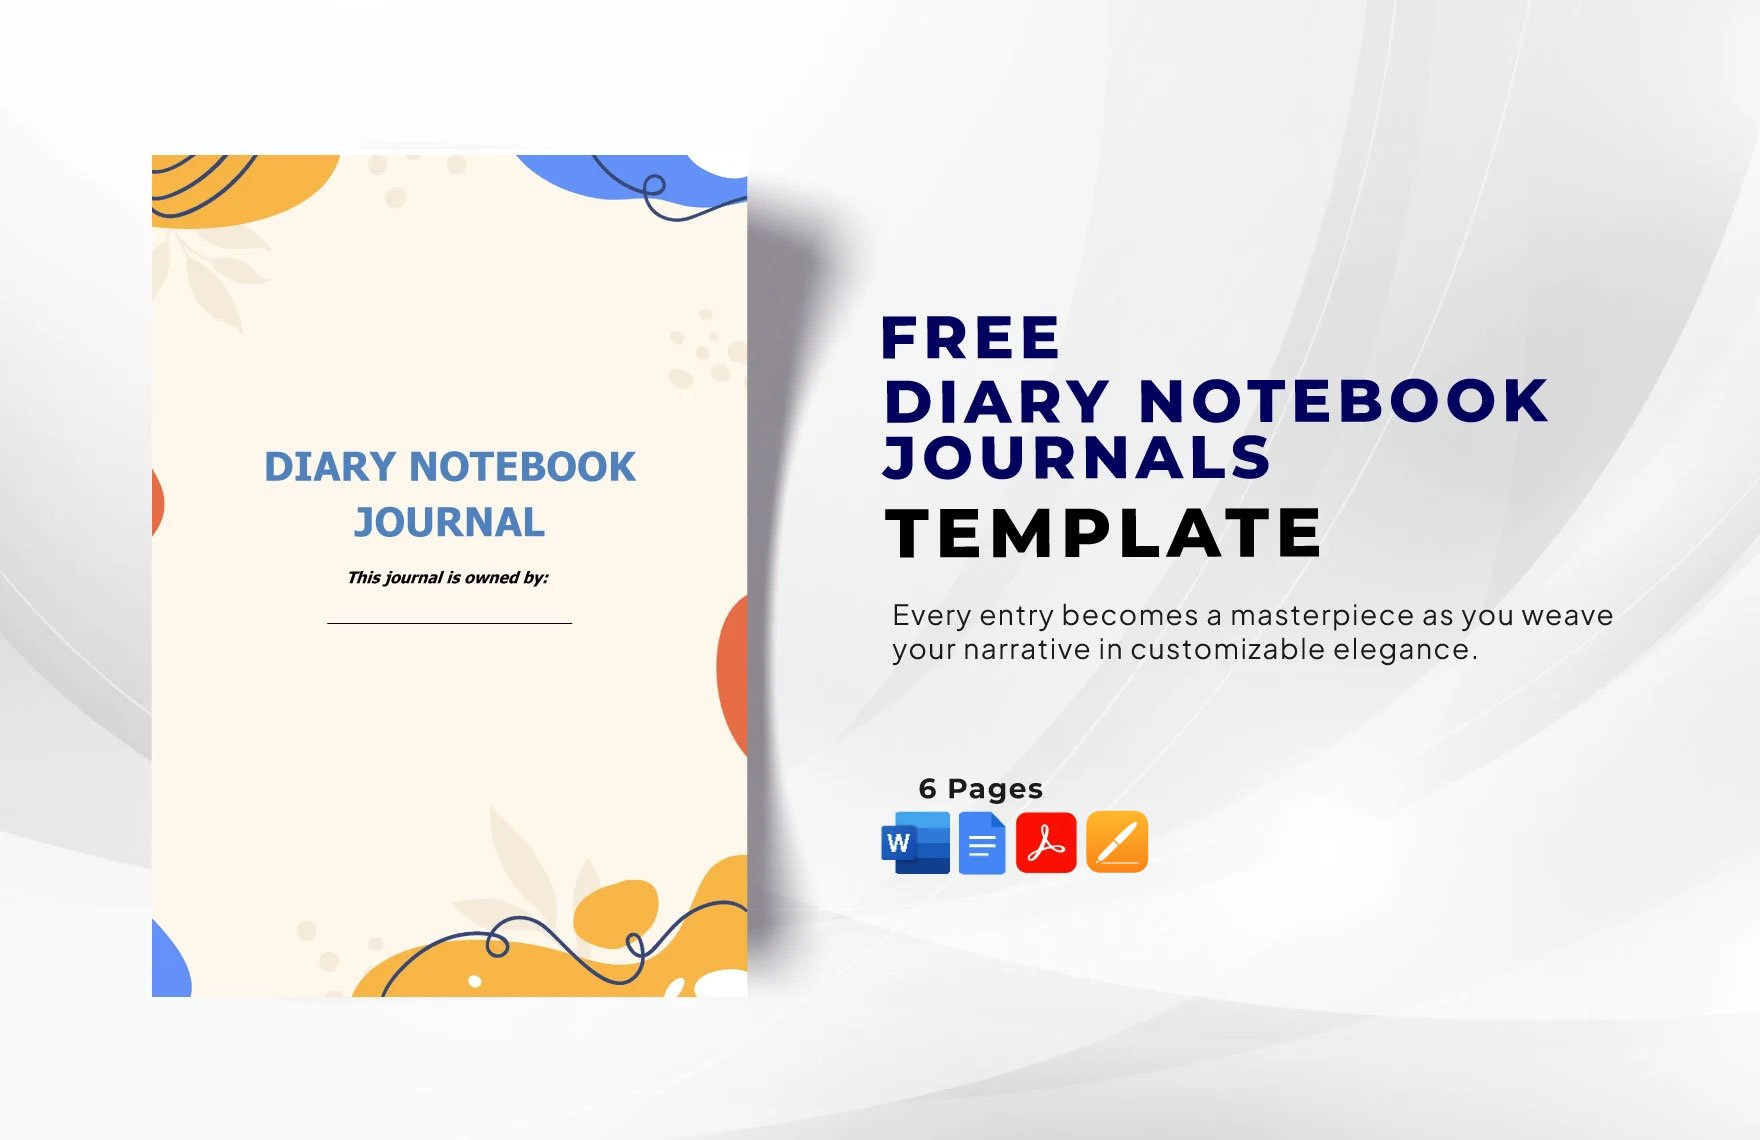 Diary Notebook Journals Template